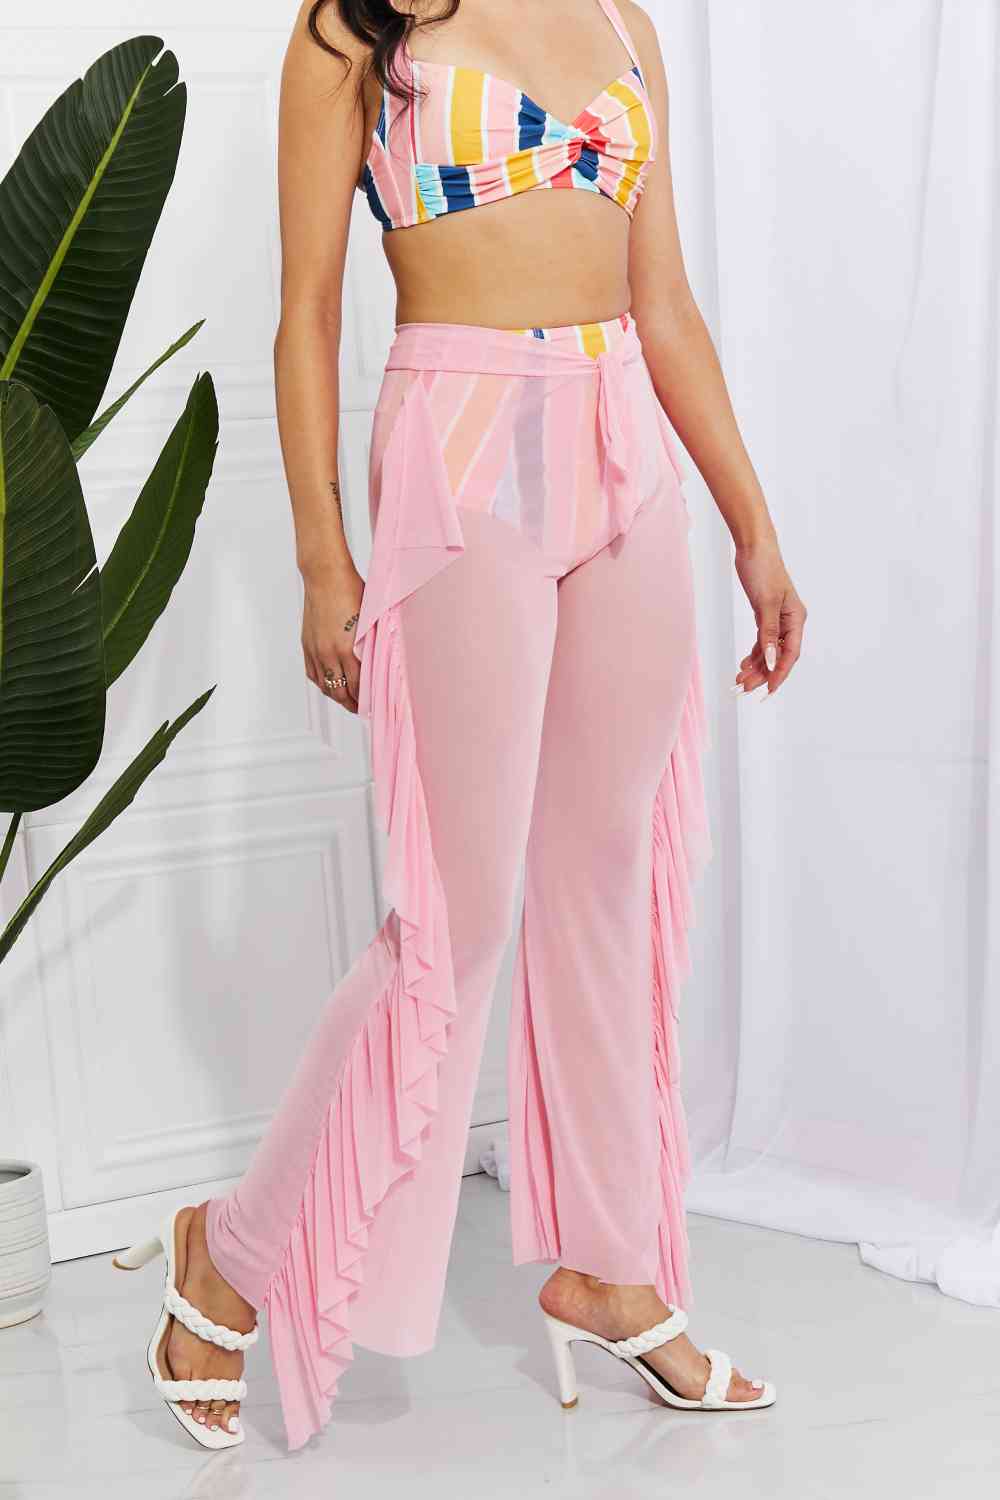 Marina West Swim Take Me To The Beach Mesh Ruffle Cover-Up Pants Active Wear Trendsi Blush Pink / One Size